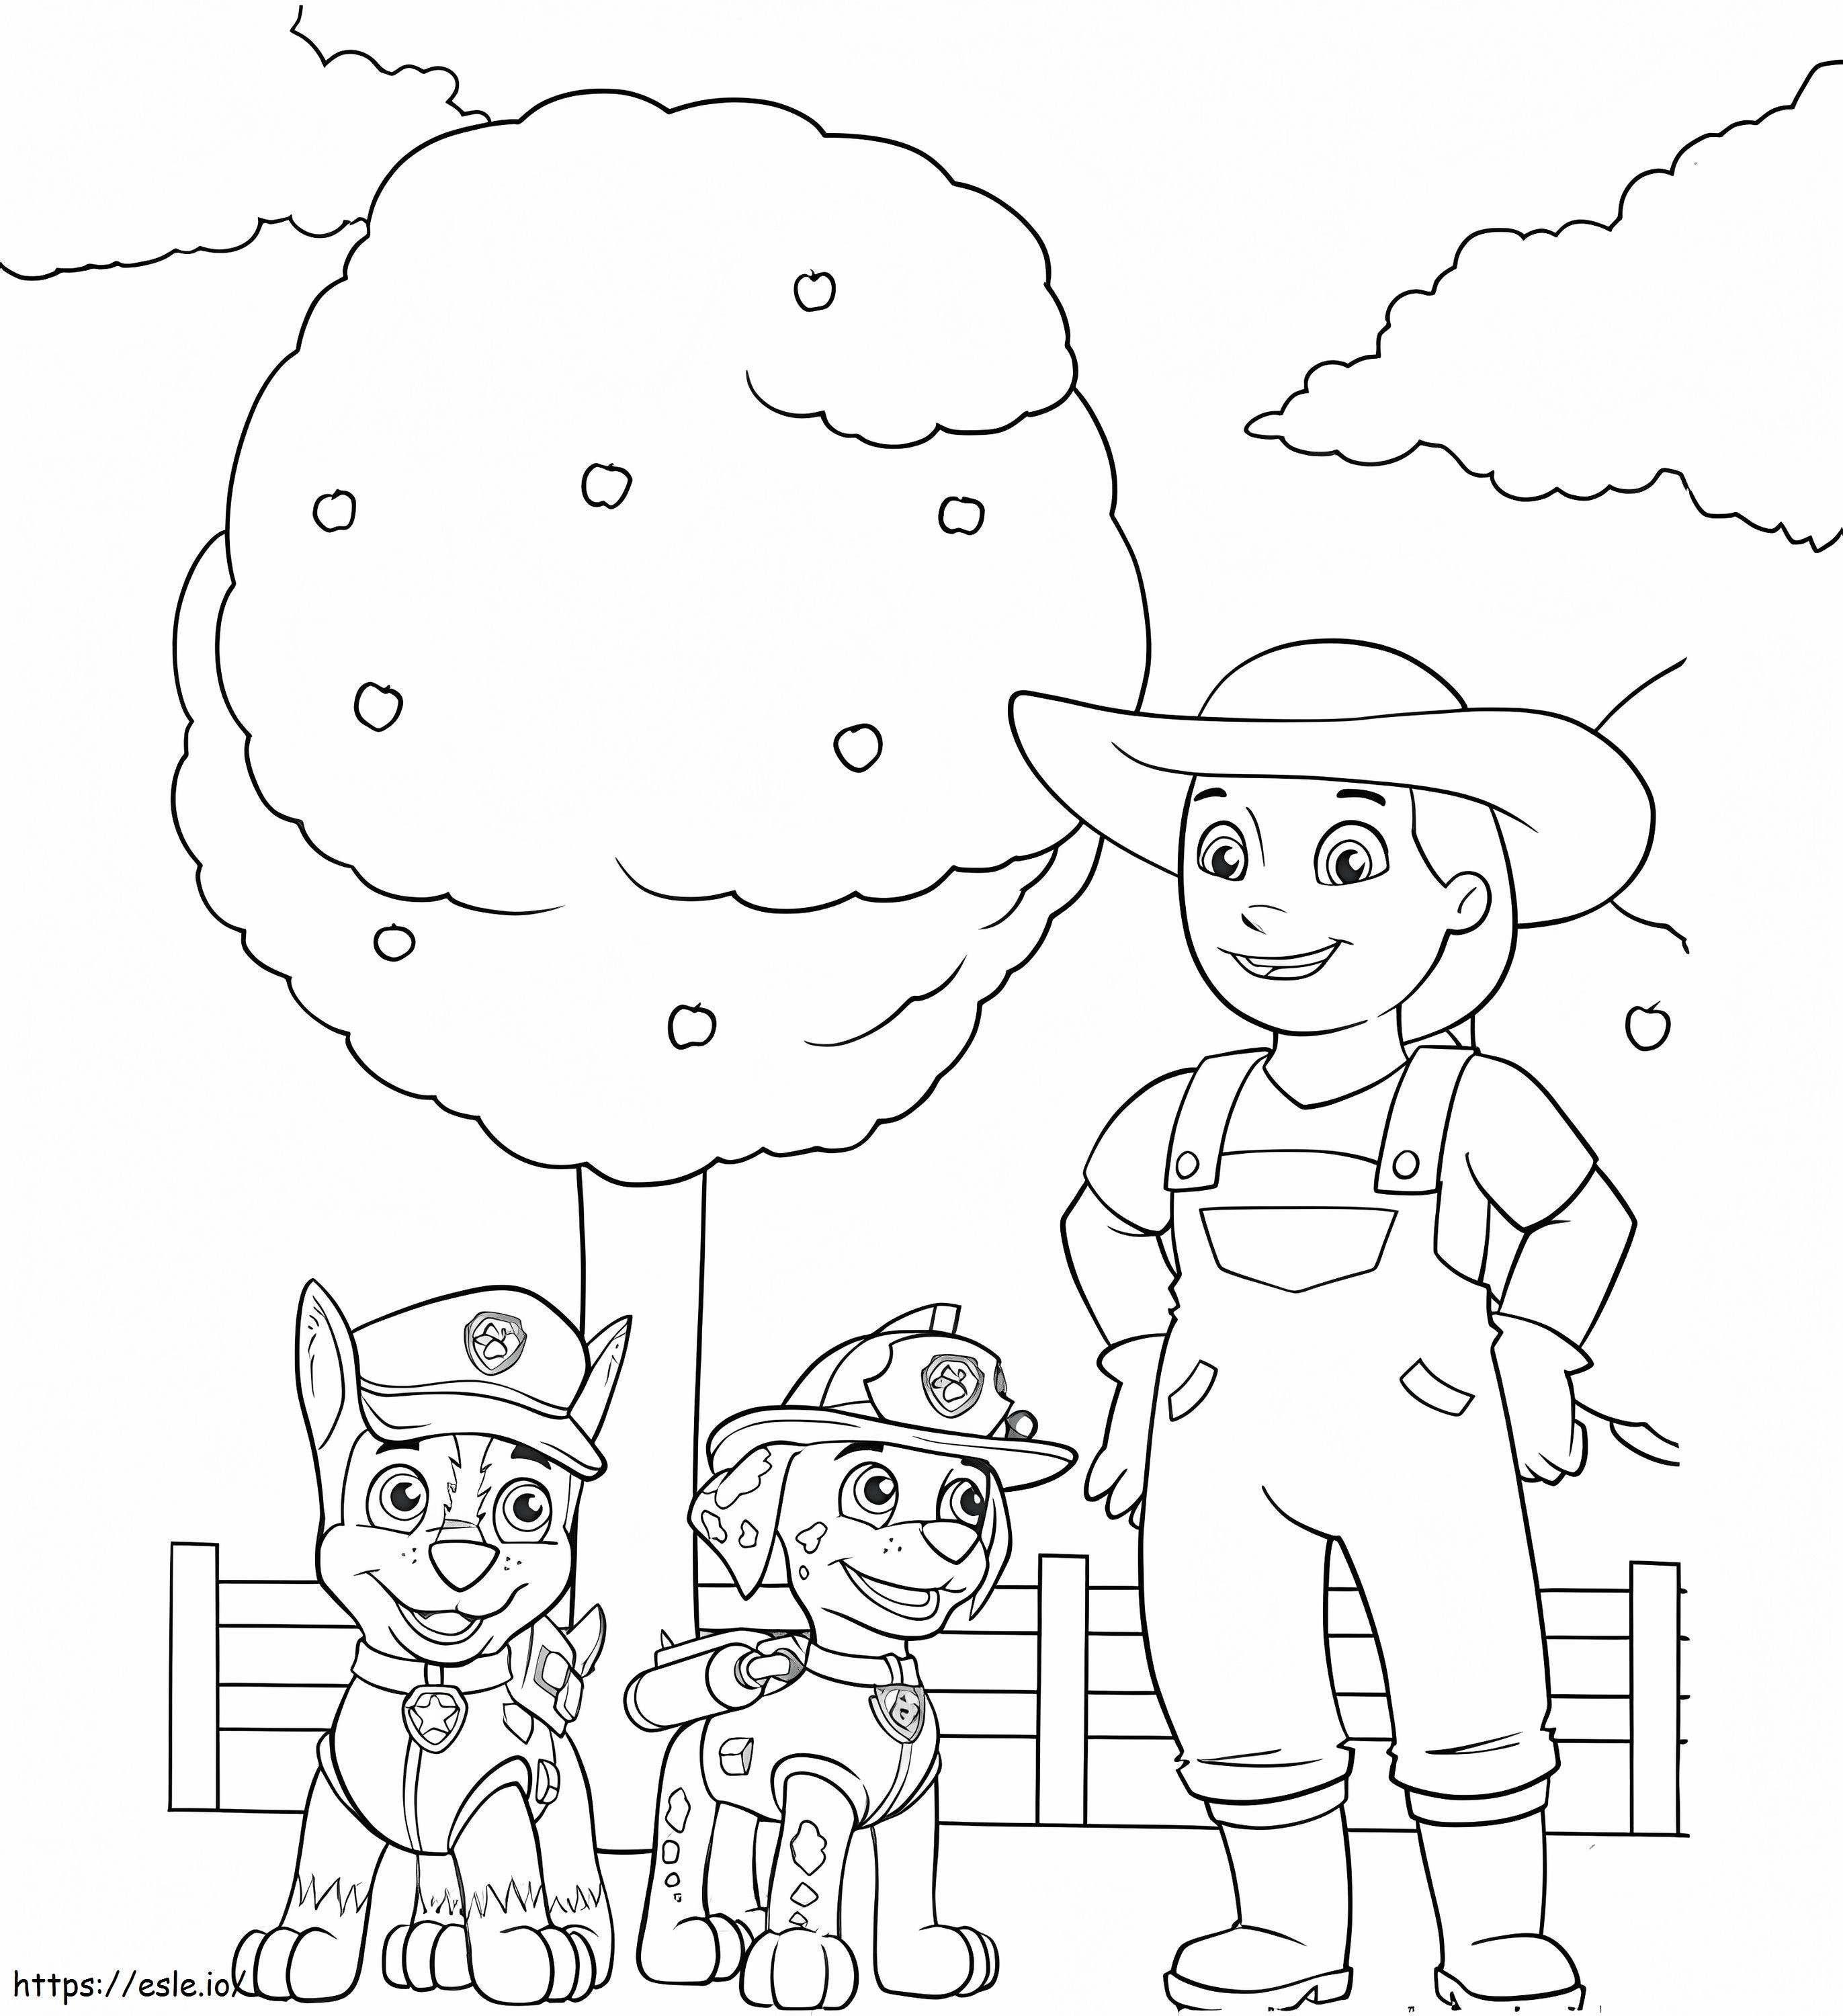 Chase Paw Patrol 11 coloring page